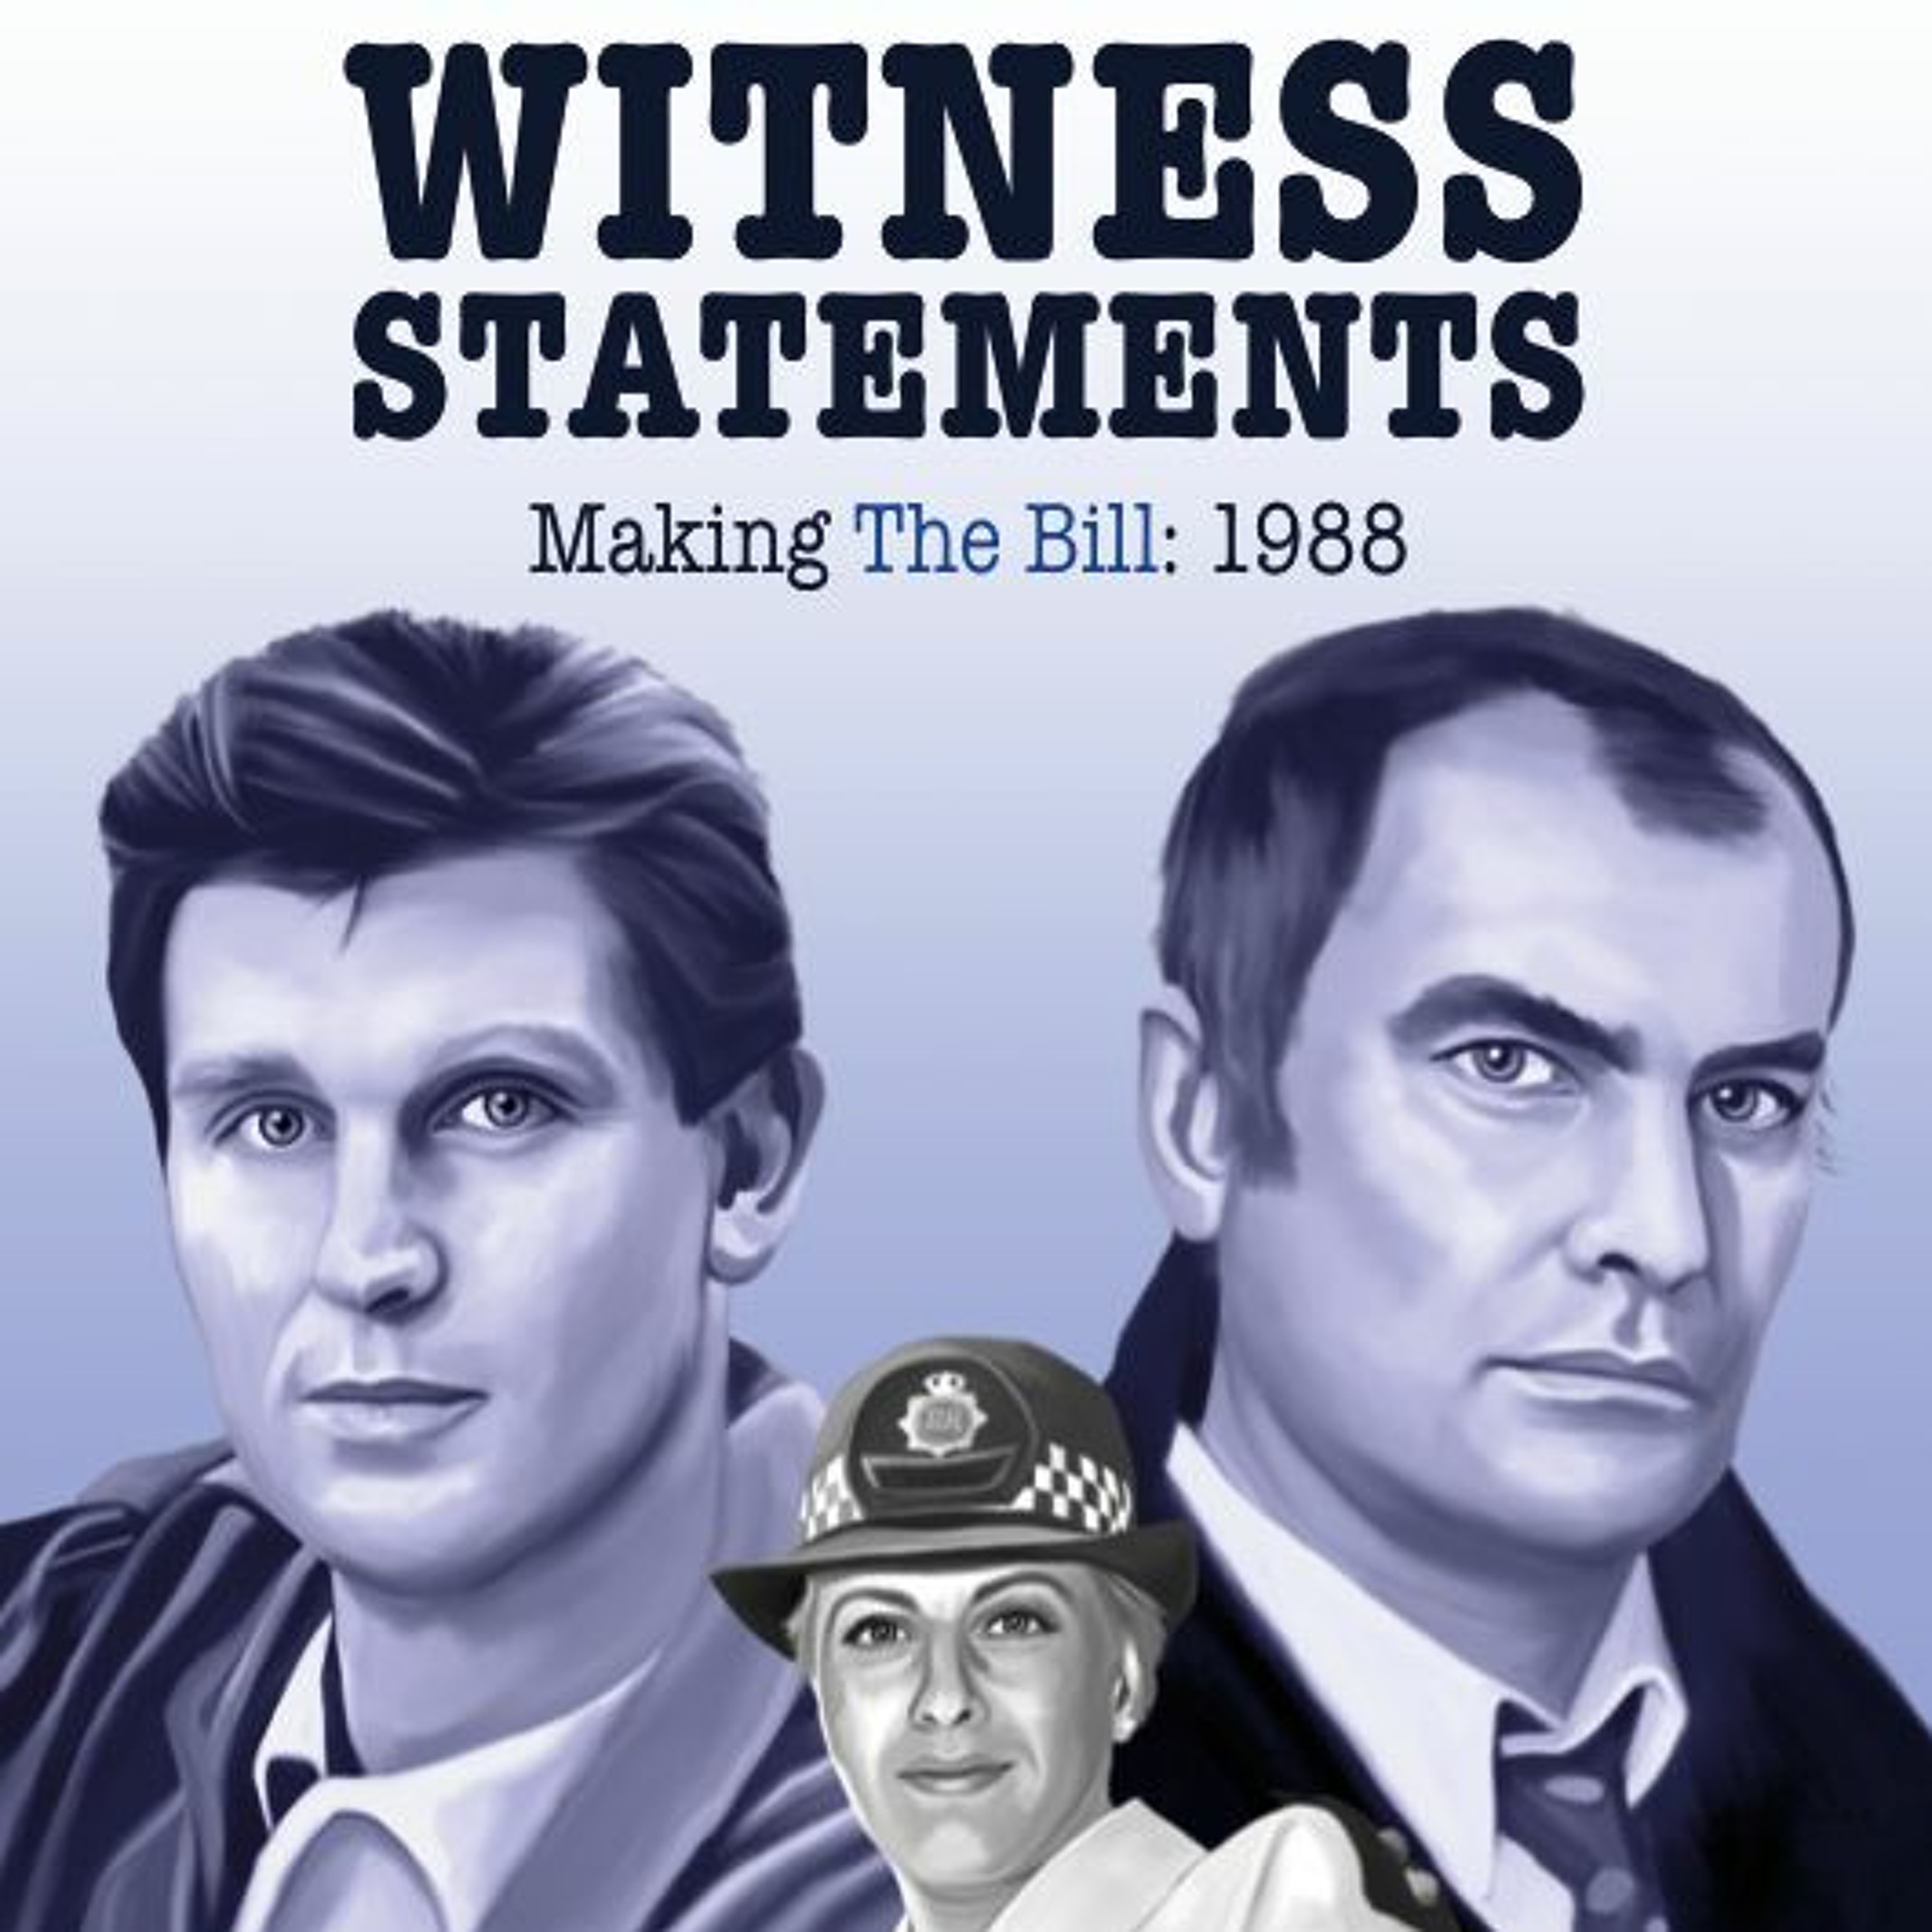 BOOK OFFERS - Witness Statements: Making The Bill